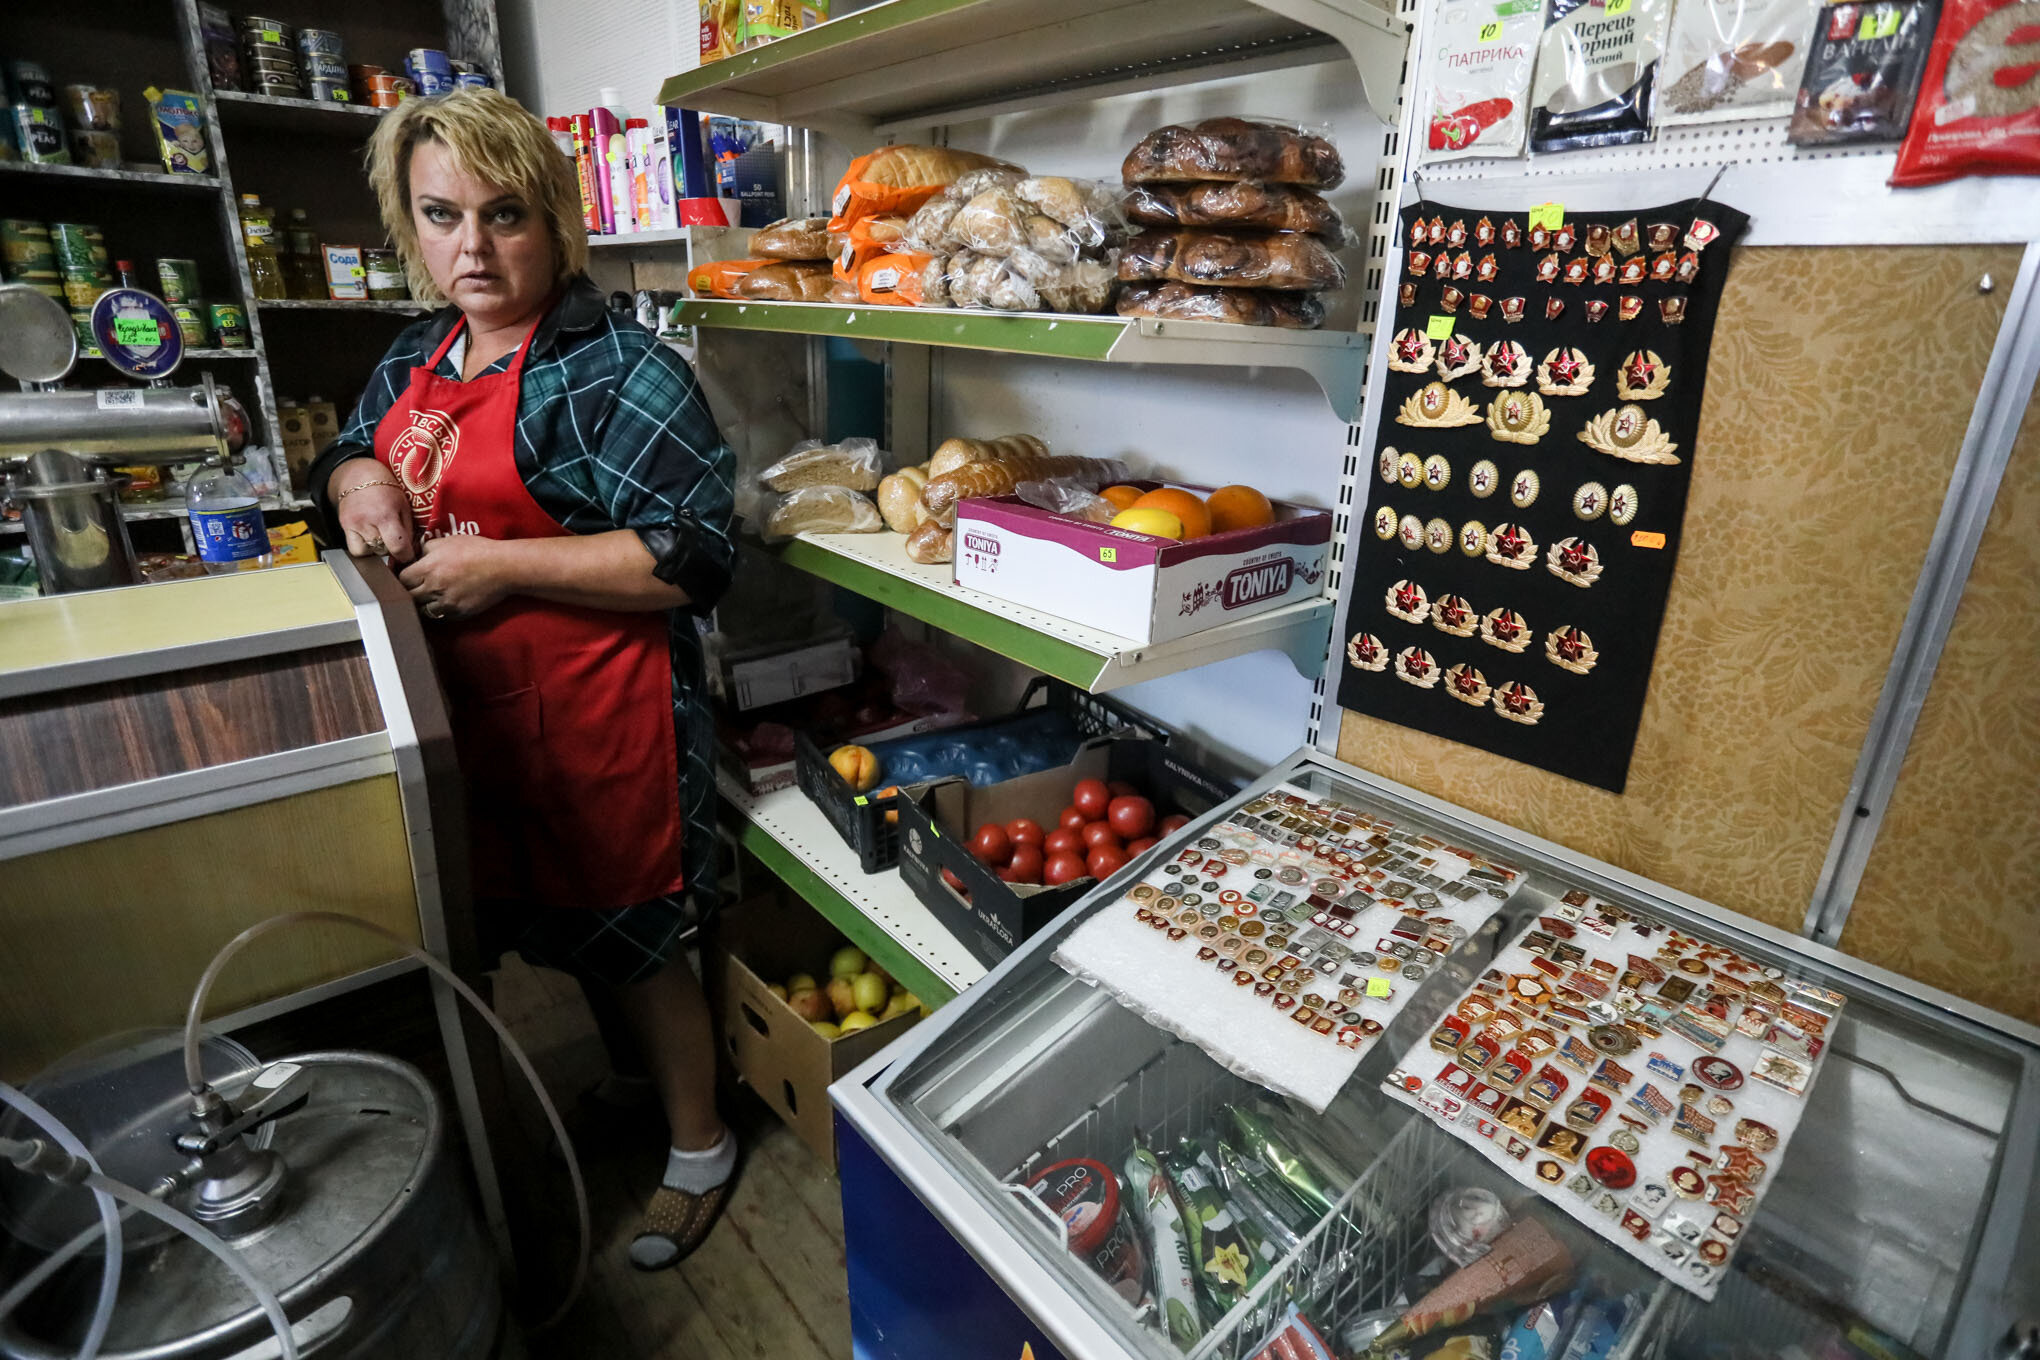 Olena Nechyporenko, entrepreneur from the Chornobyl exclusion zone, speaks to the Kyiv Post at her grocery store on Oct. 5, 2021. (Oleg Petrasiuk)